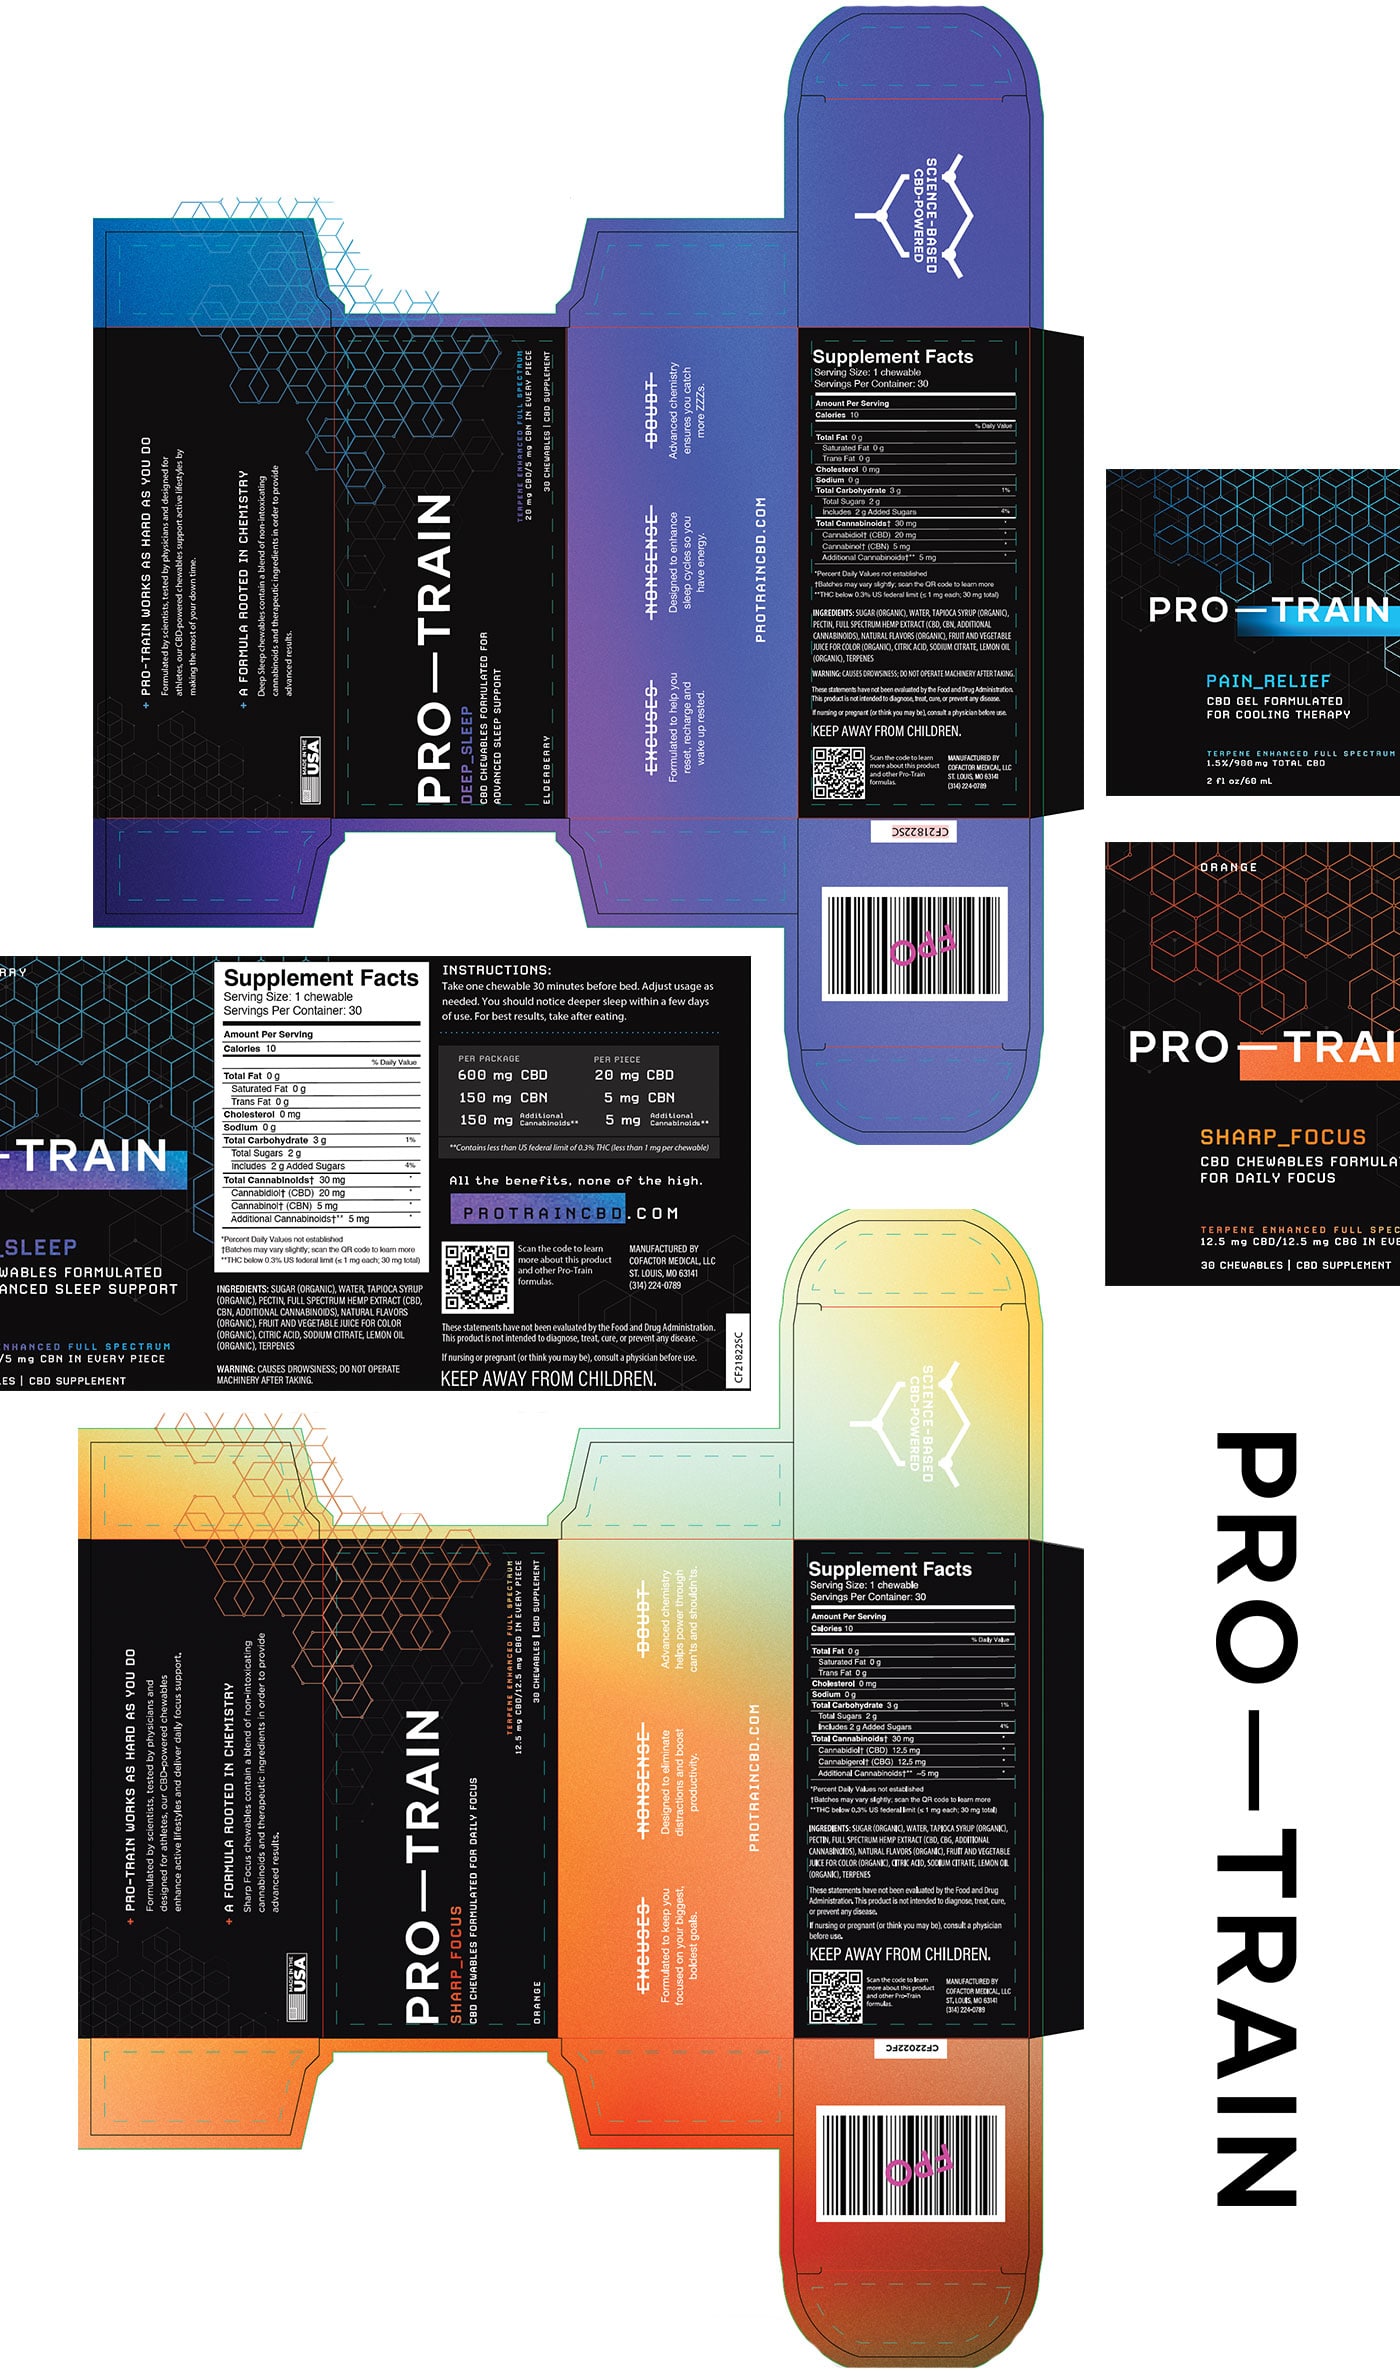 CBD packaging designs for Pro-Train products